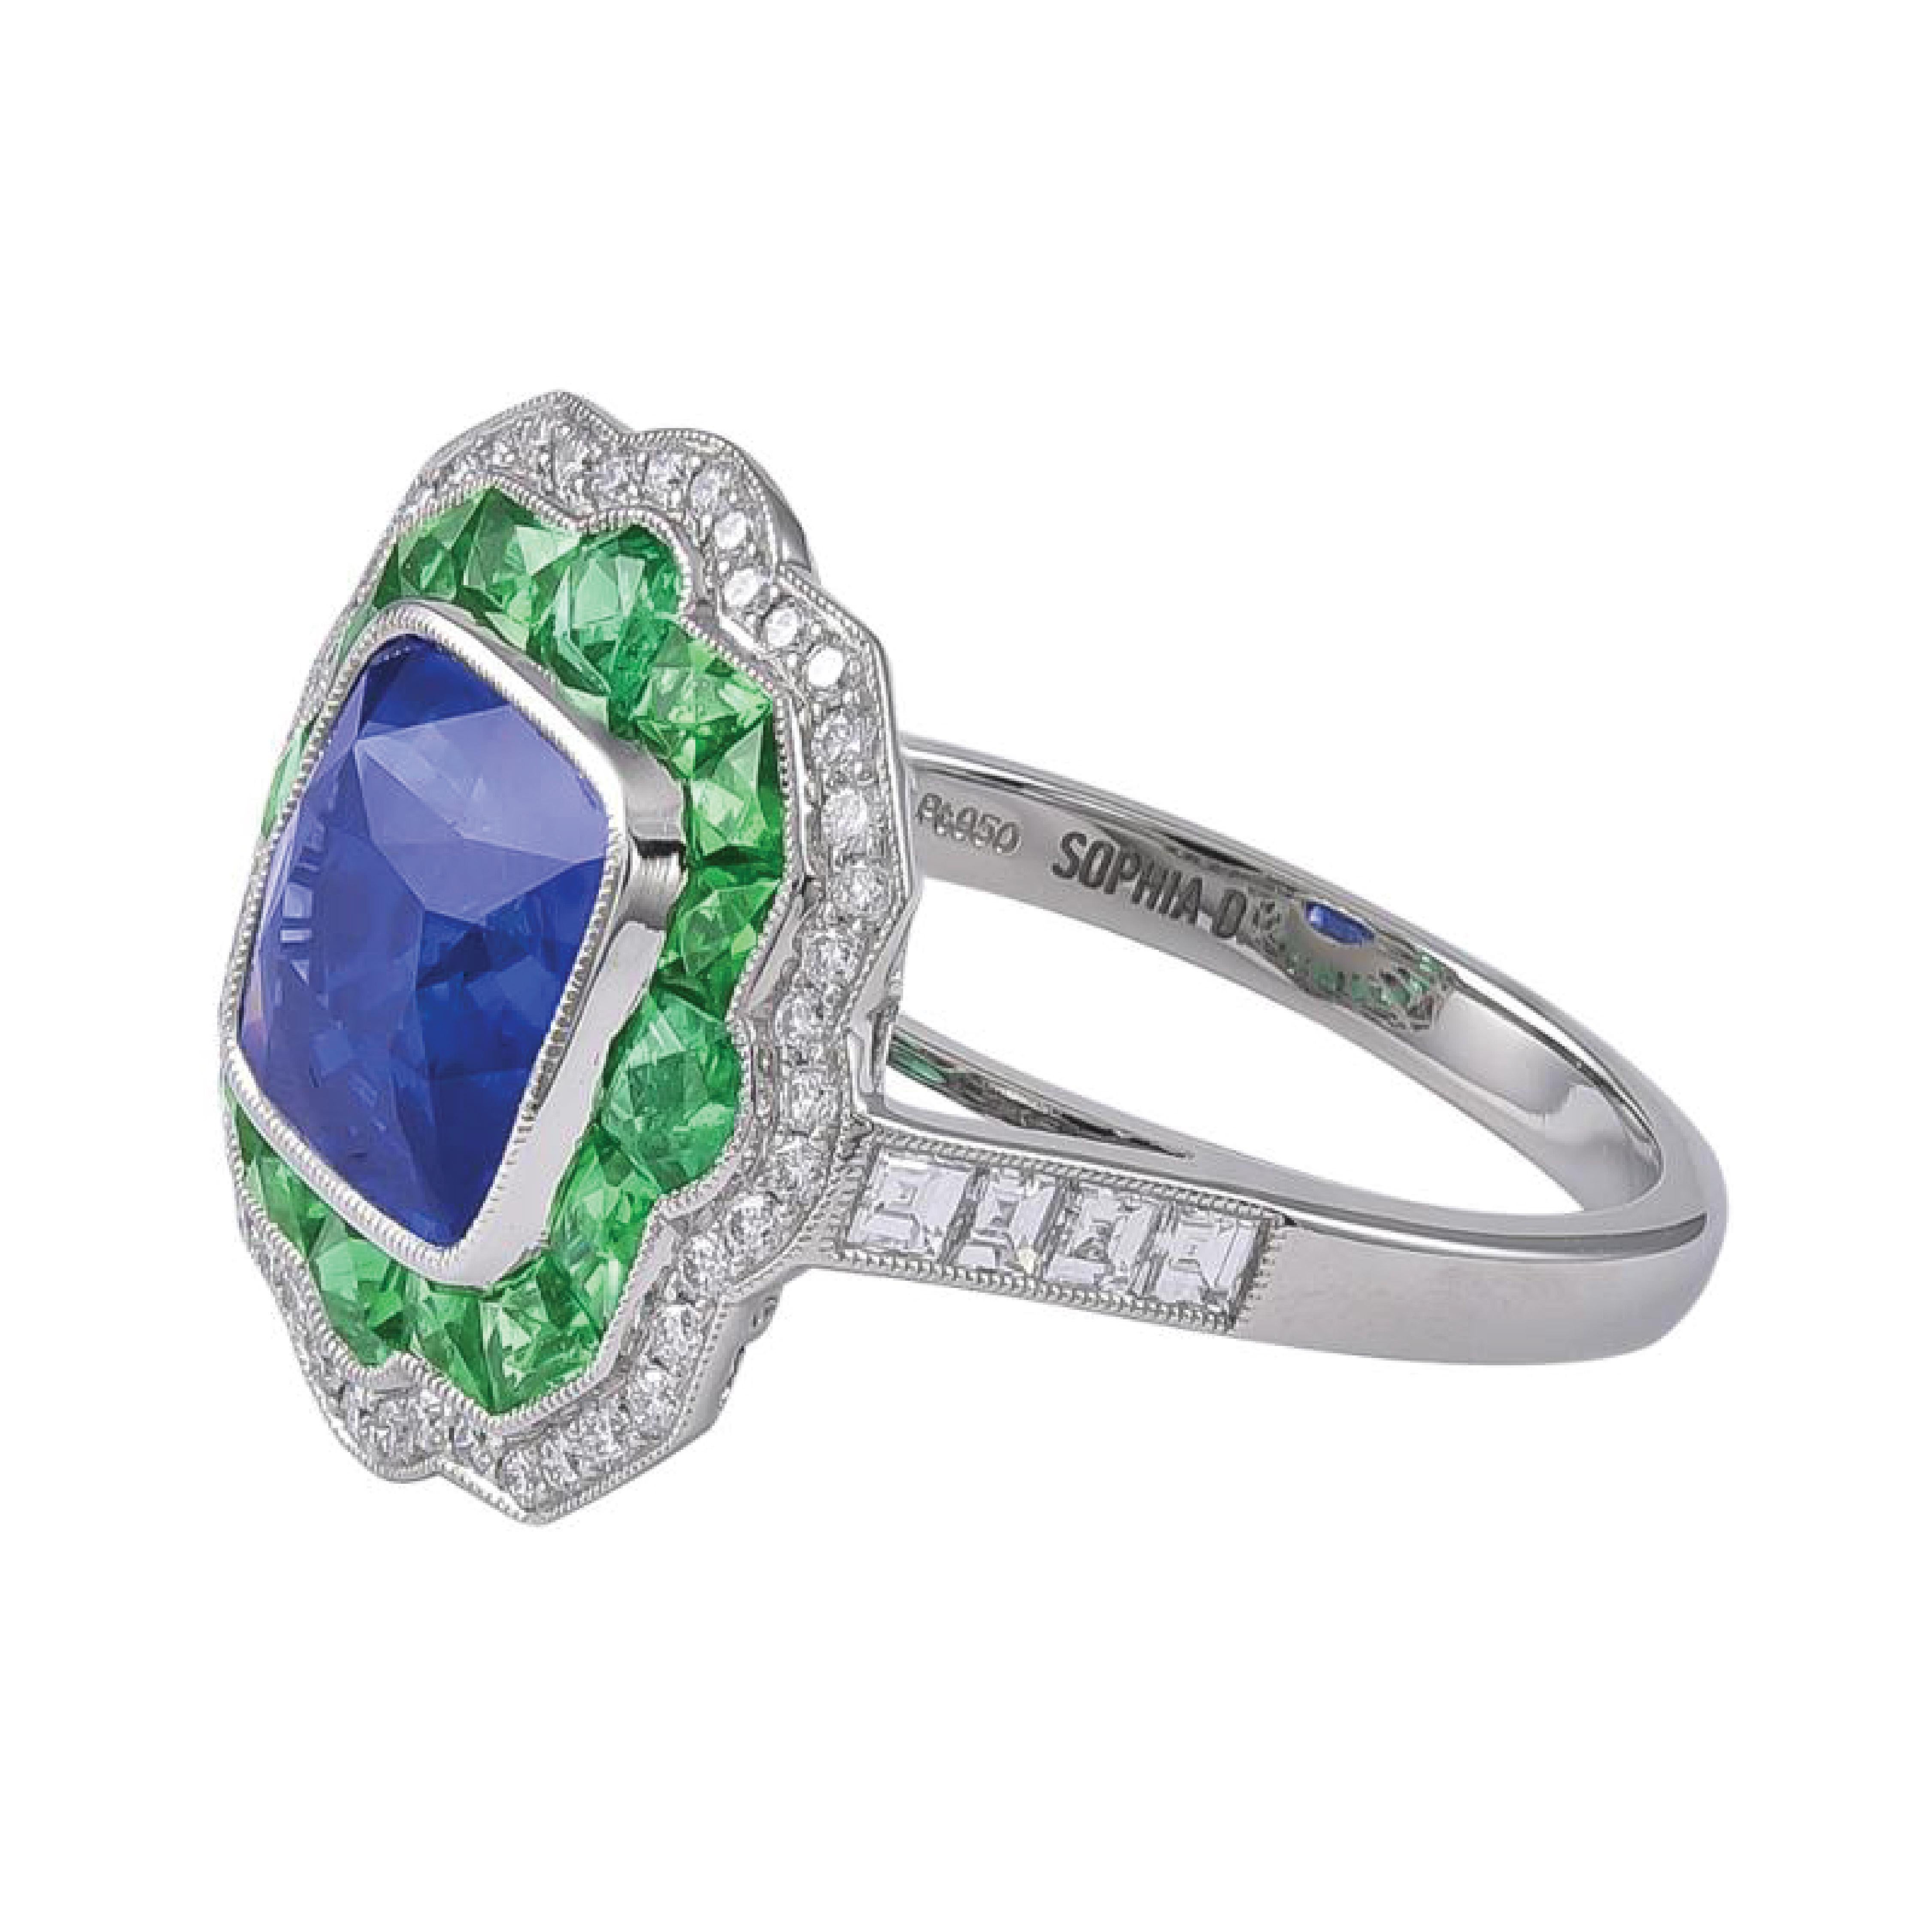 Art Deco Inspired Platinum Ring with certified 4.09 carats Cushion Sapphire center surrounded by French Cut Emeralds total weighing 0.65 carats and Small Diamonds total weighing 0.22 carats.

Sophia D by Joseph Dardashti LTD has been known worldwide